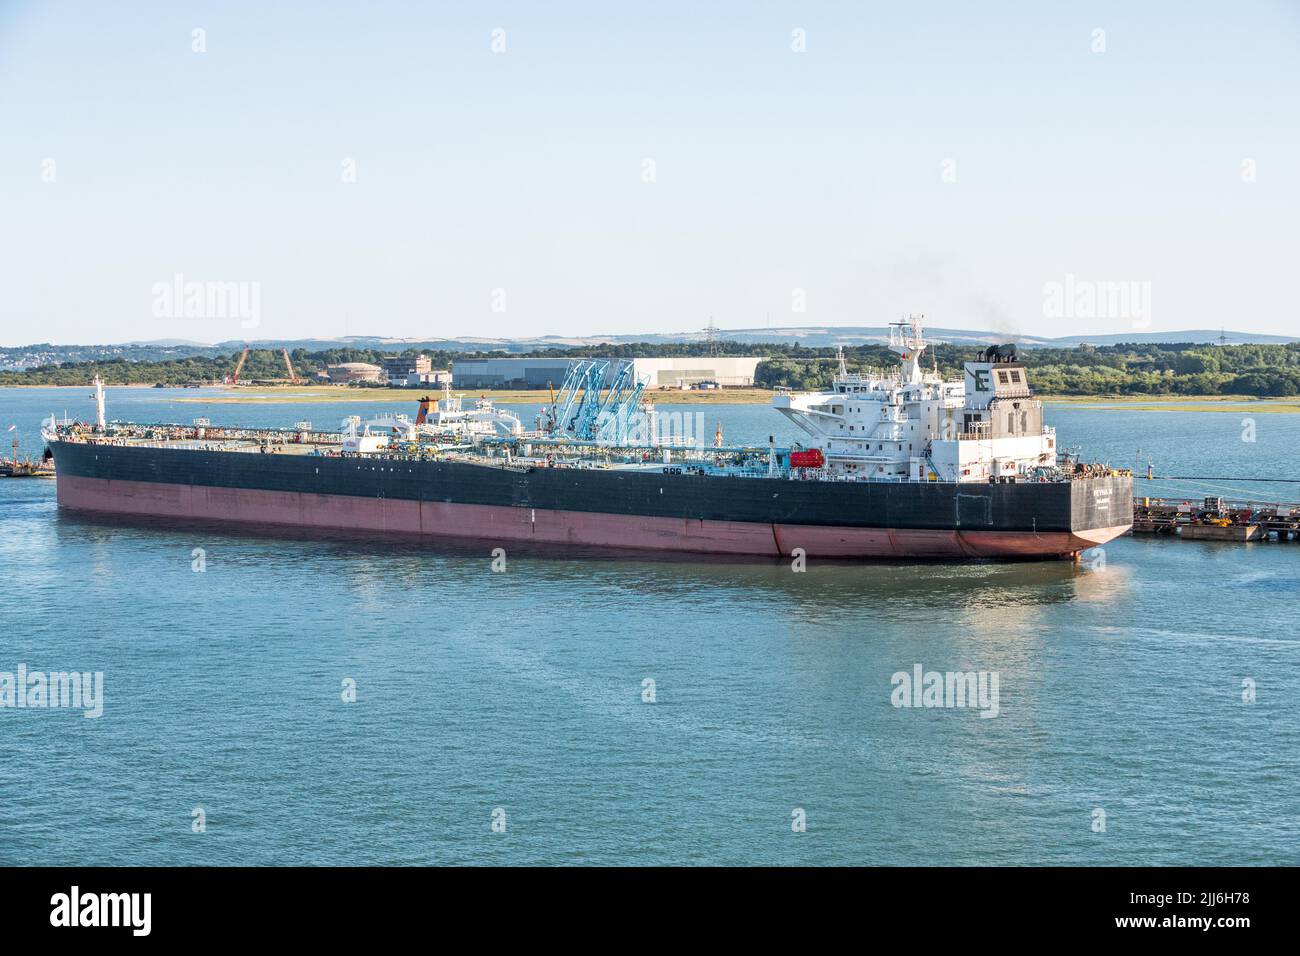 Feyha N, crude oil tanker docked at the Southampton oil refinery and gas storage site. Stock Photo